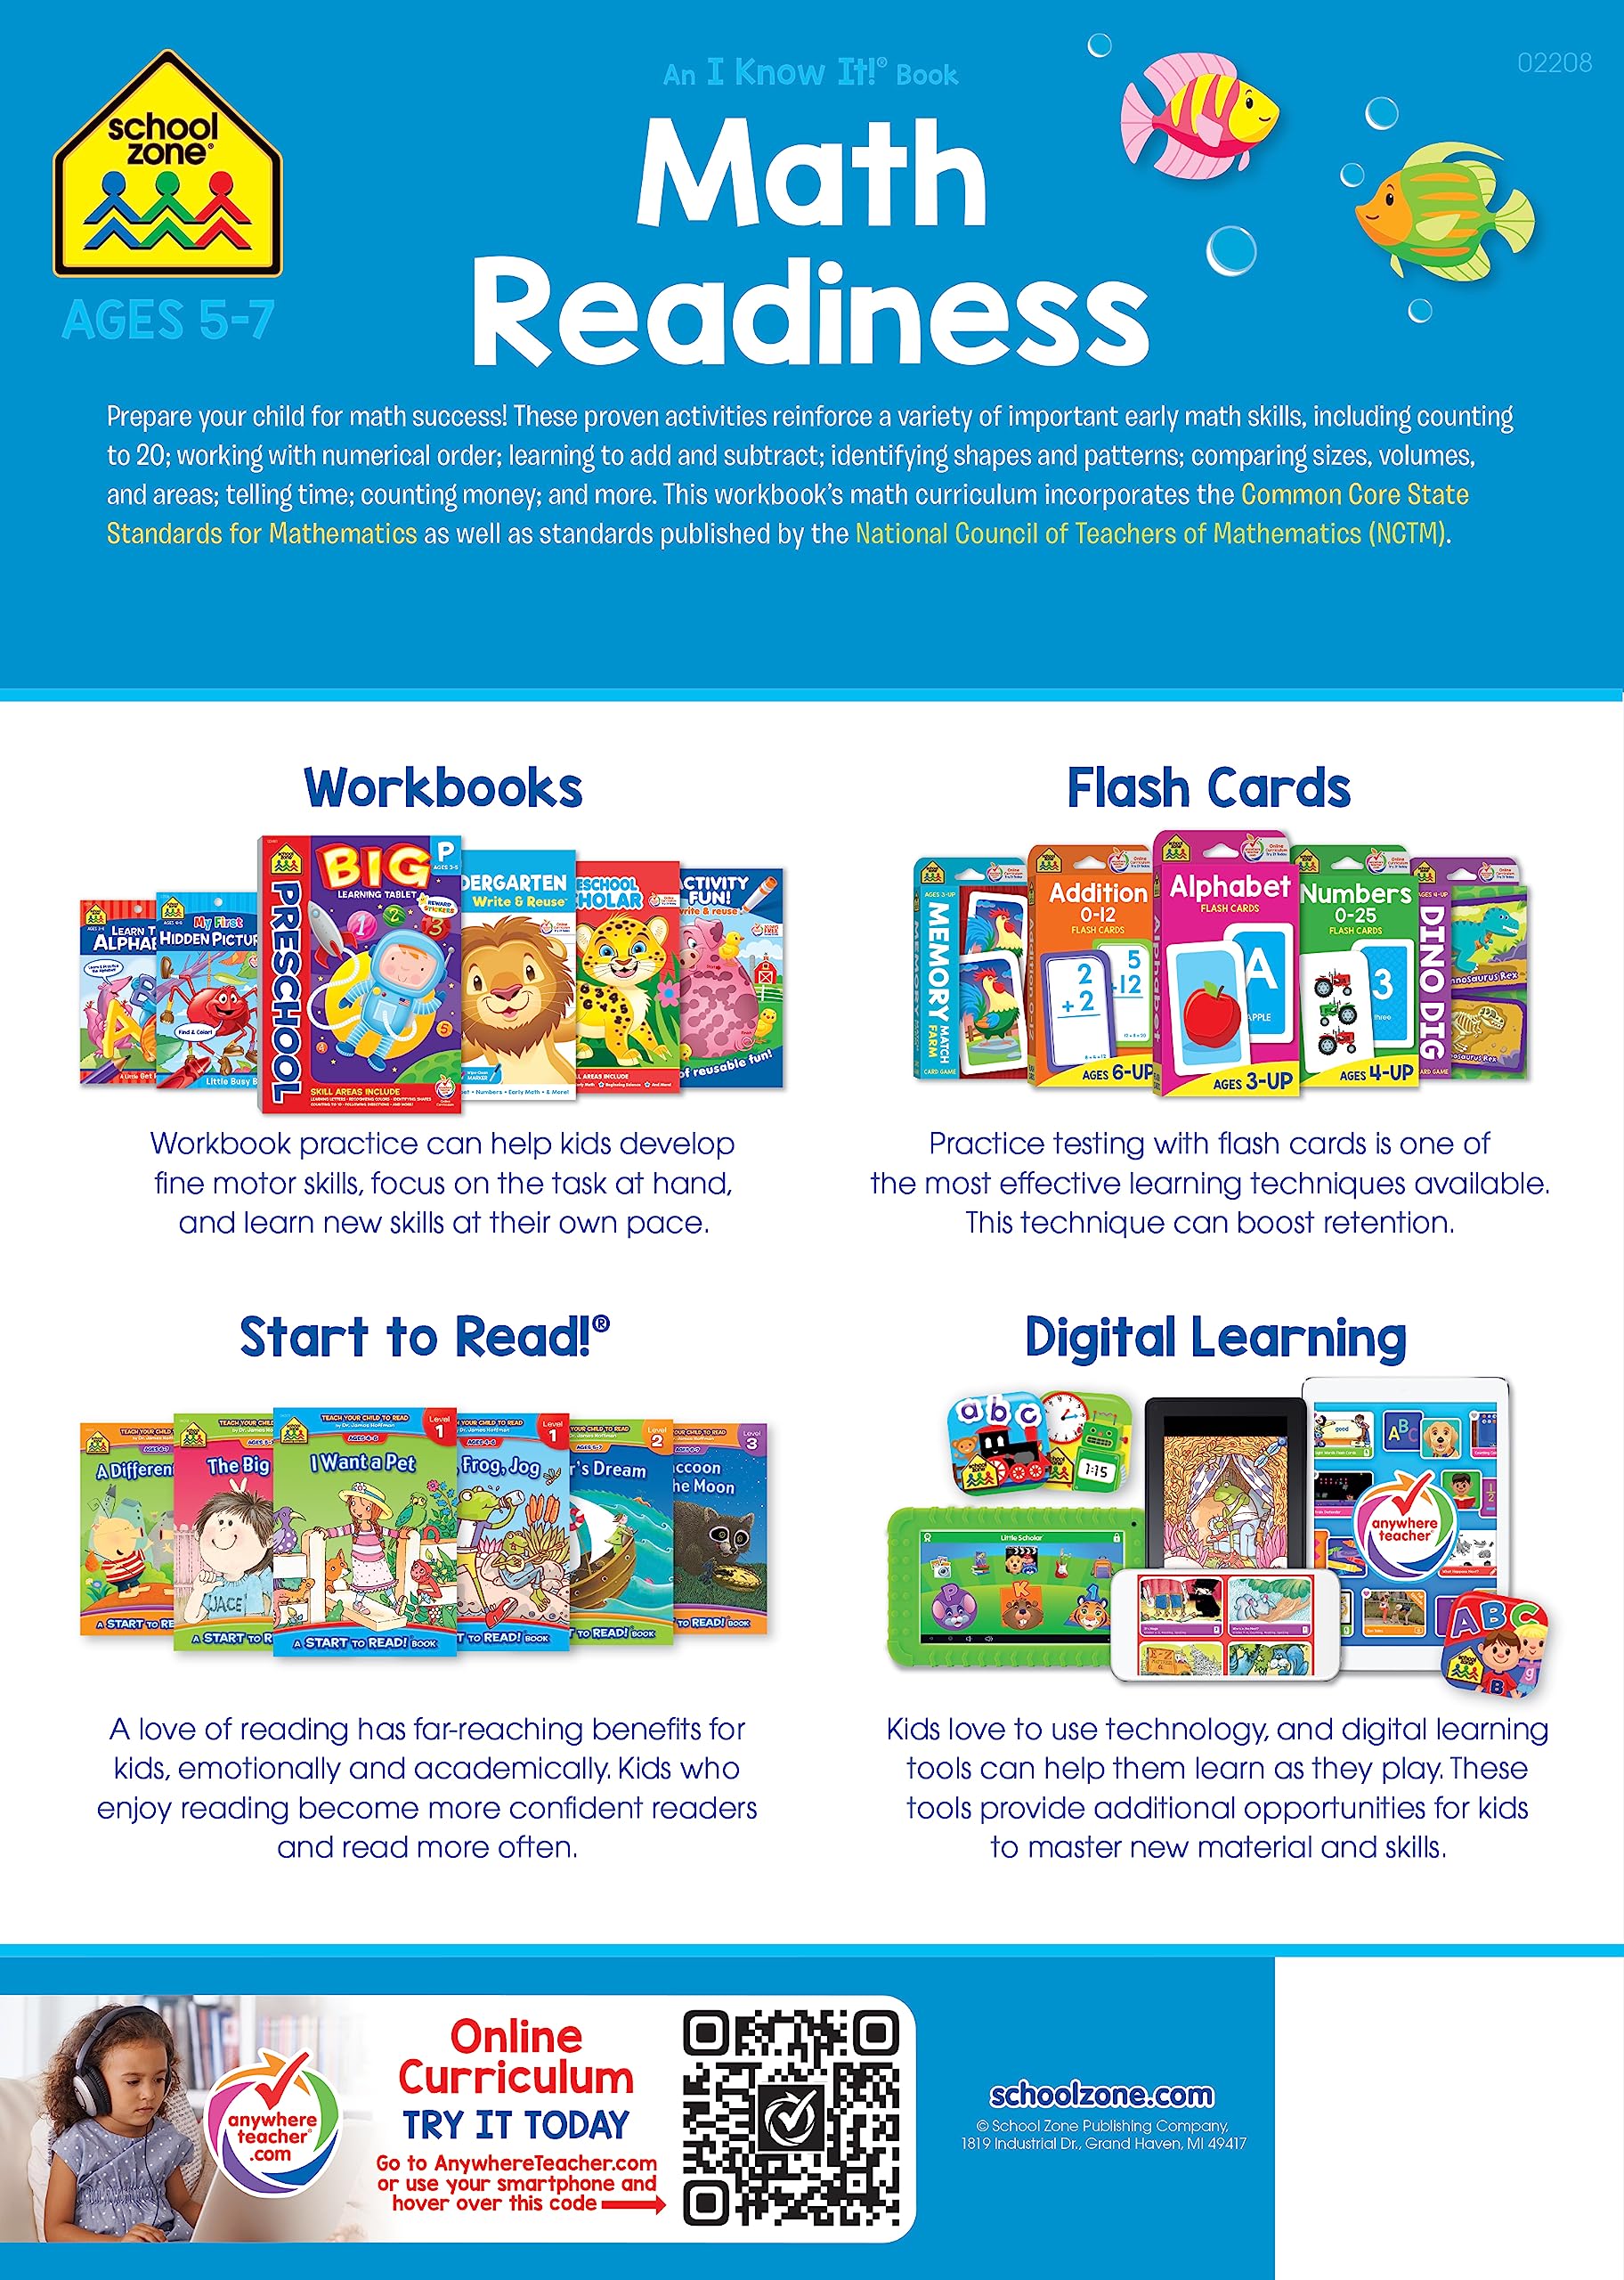 School Zone - Math Readiness Workbook - 64 Pages, Ages 5 to 7, Kindergarten to 1st Grade, Telling Time, Counting Money, Addition, Subtraction, and More (School Zone I Know It!® Workbook Series)